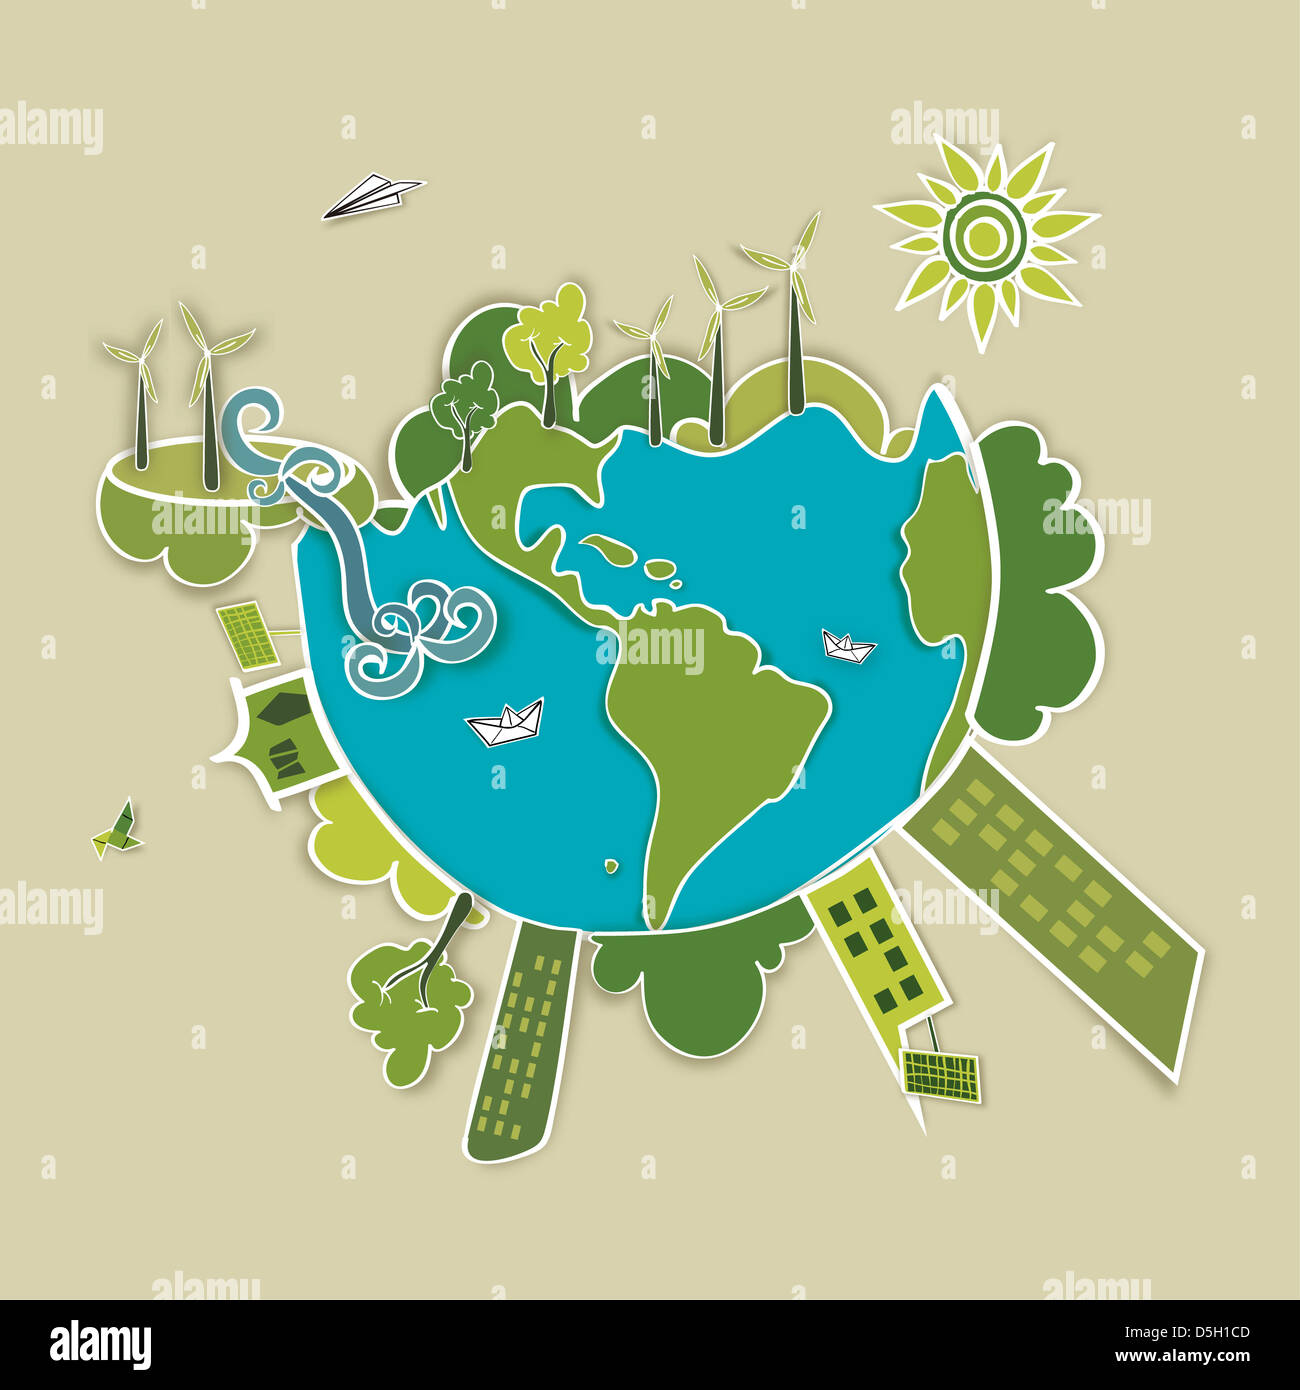 Go green world. Industry sustainable development with environmental conservation background illustration. Vector file layered for easy manipulation Stock Photo